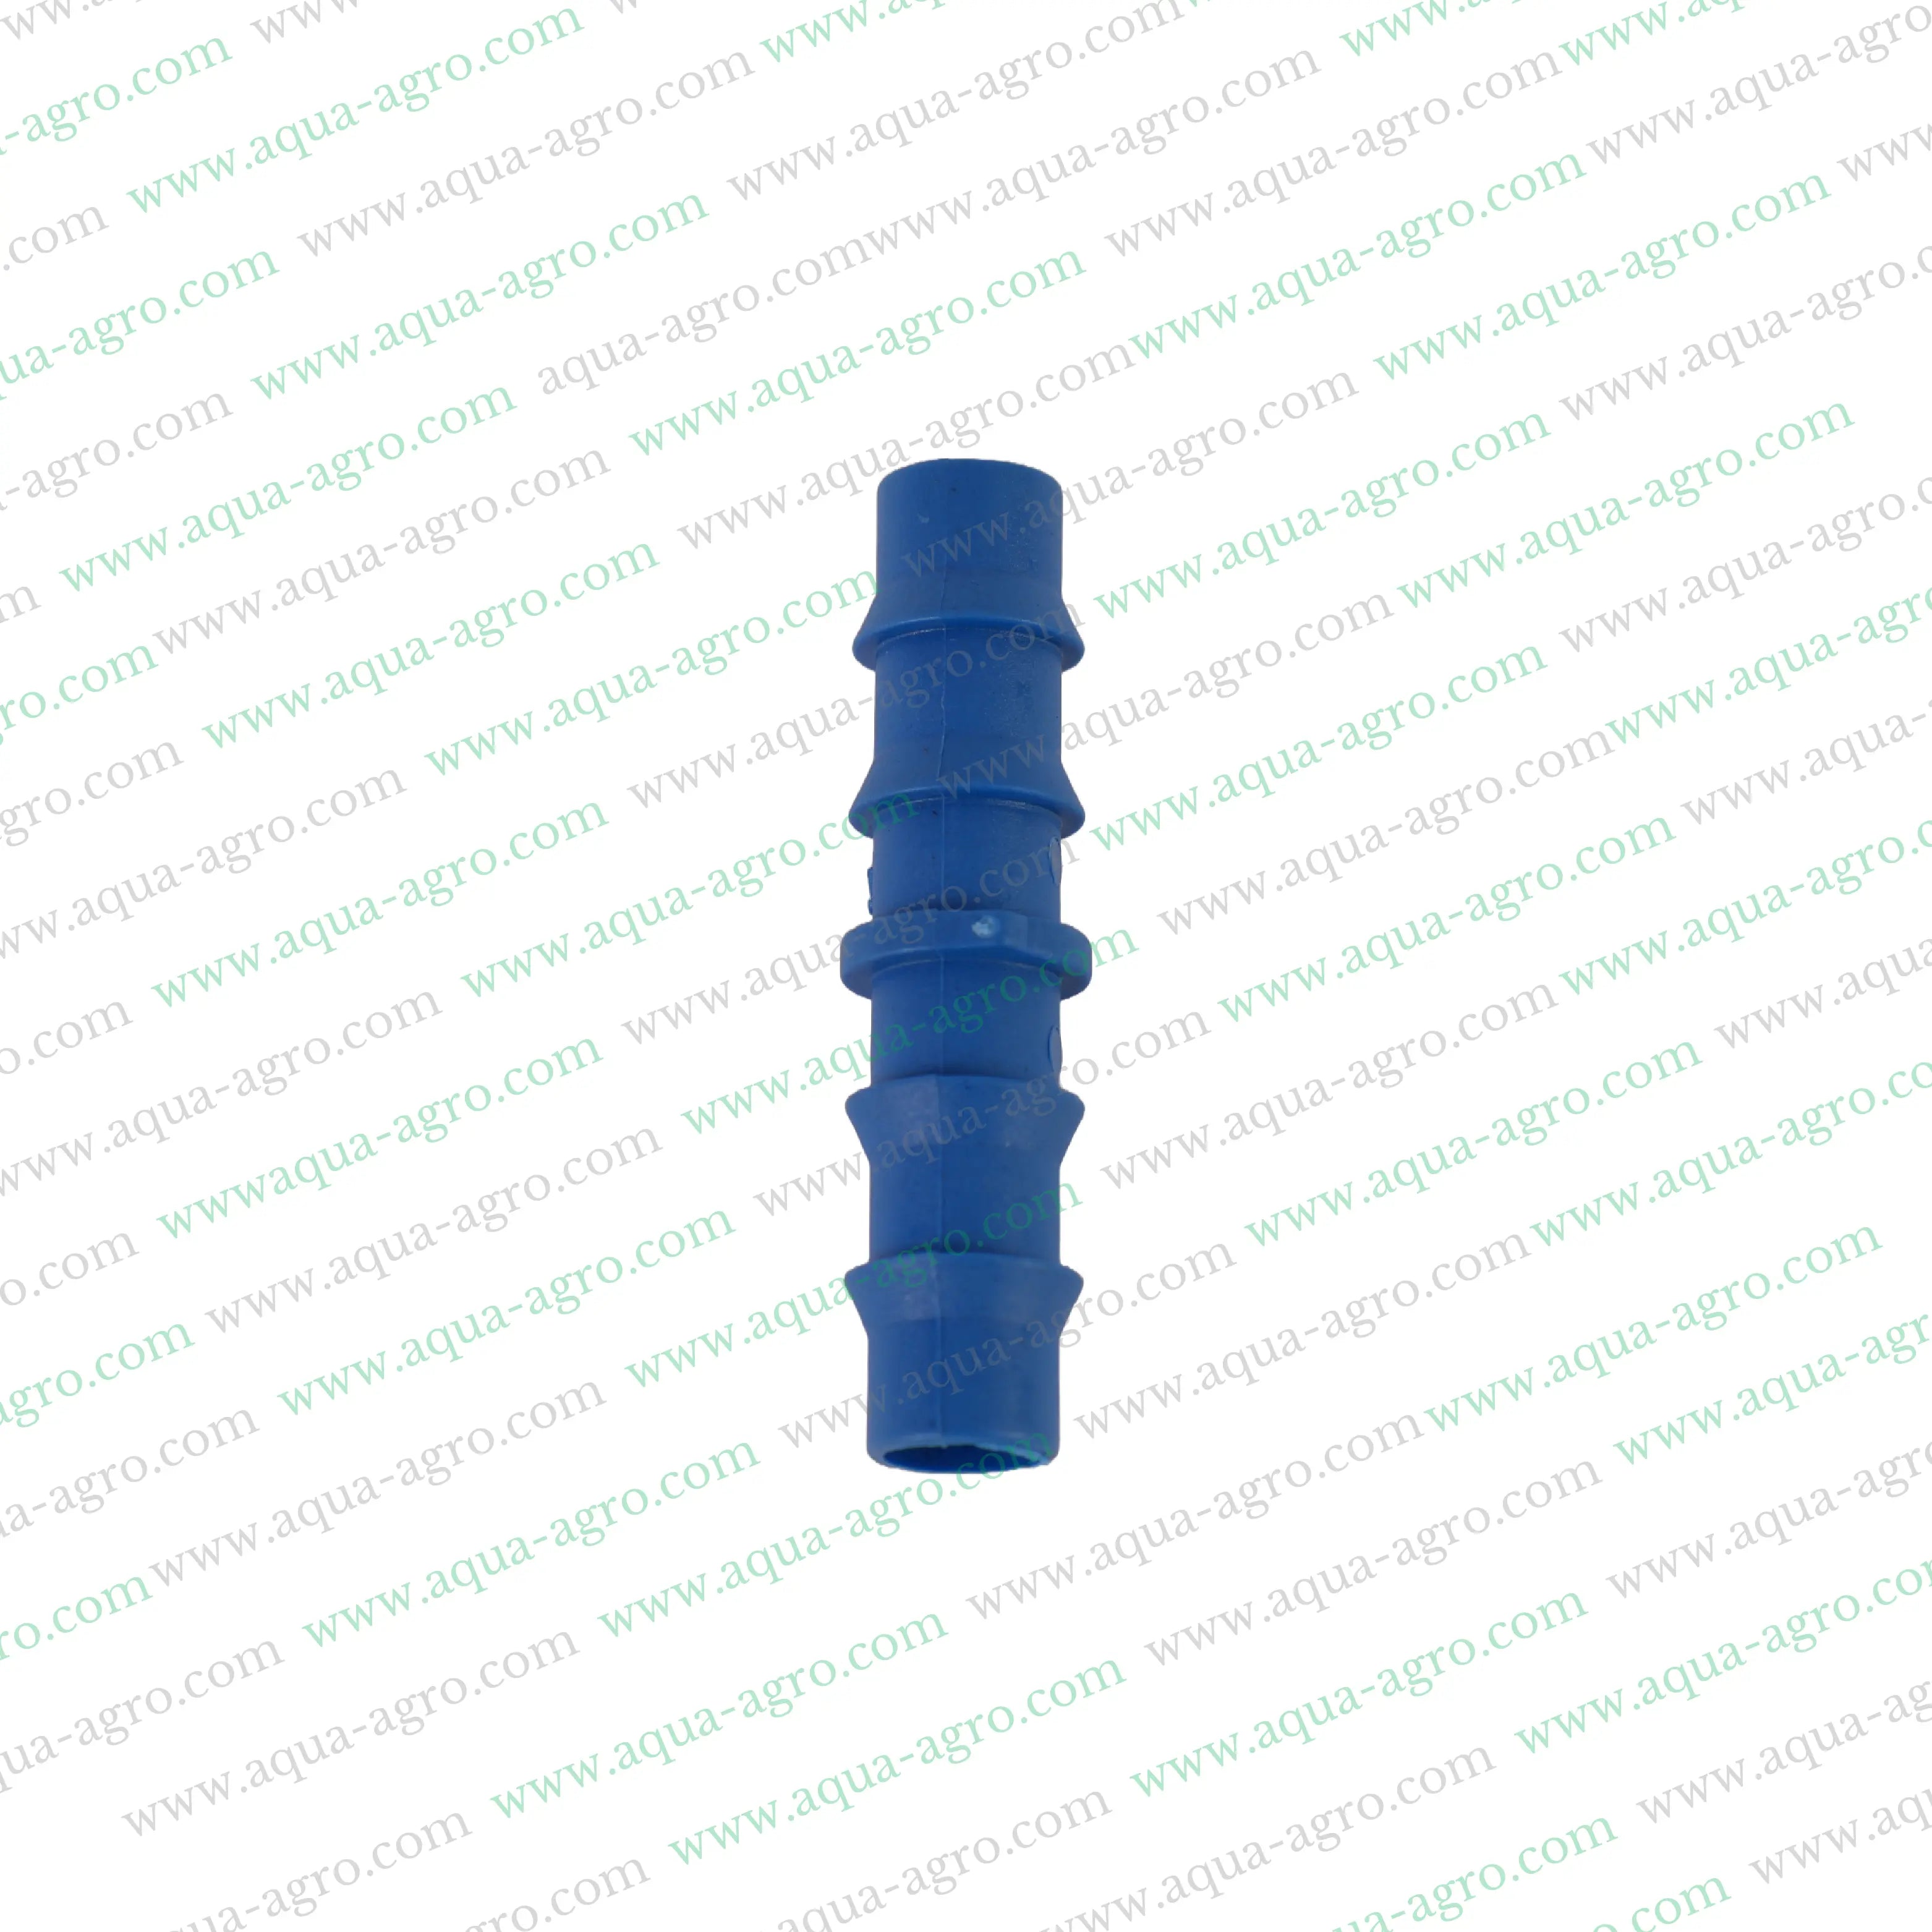 AQUA - AGRO | Drip Fittings And Accessories - Barbed Fittings - Lite - coupler/Joiner - 12mm